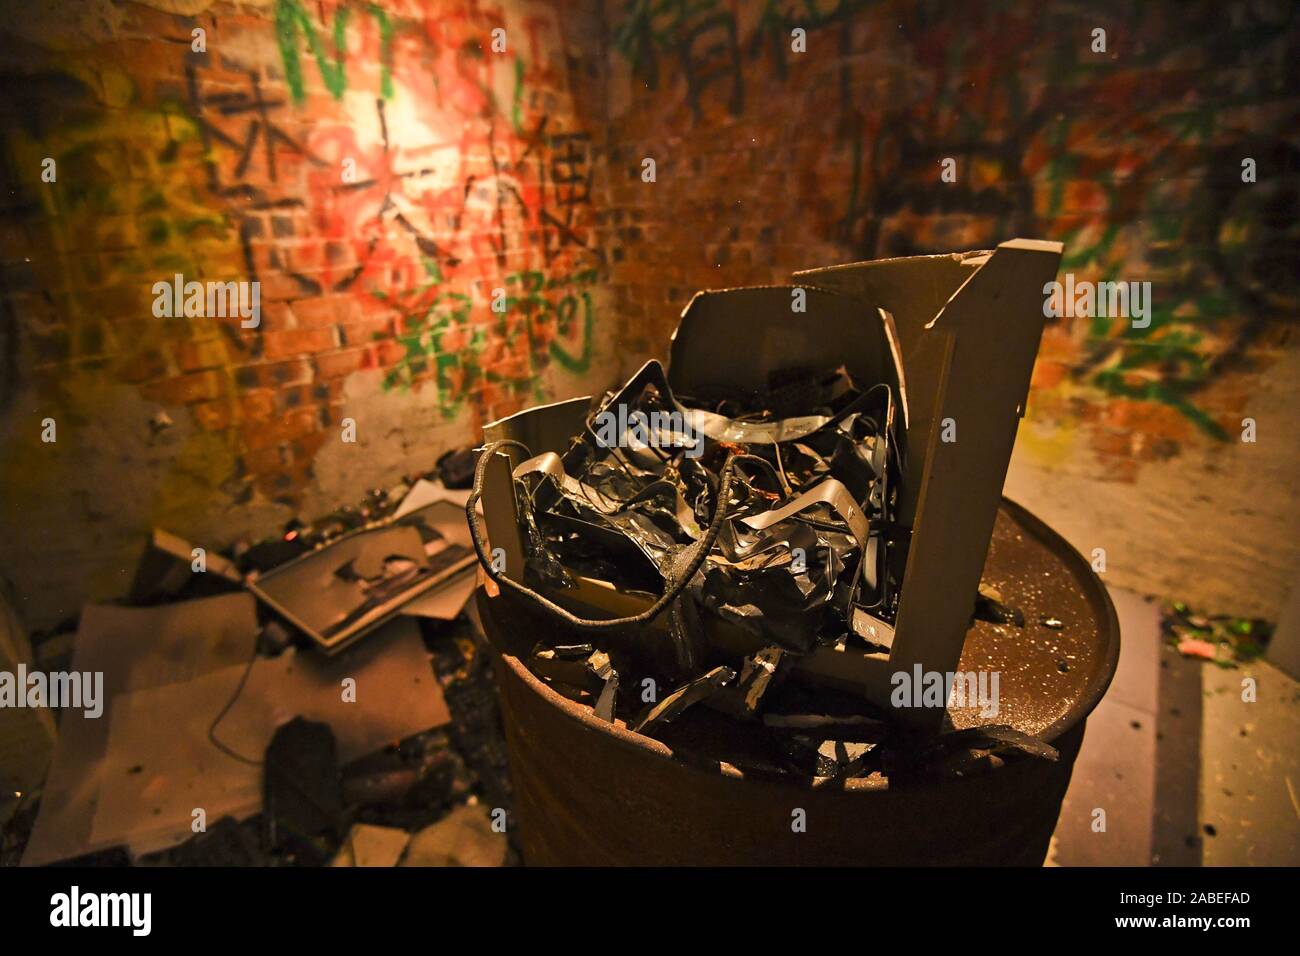 Stuff broken by customers to release stress and negative mood are everywhere in the first frustration venting room opened in Nanning city, south China Stock Photo